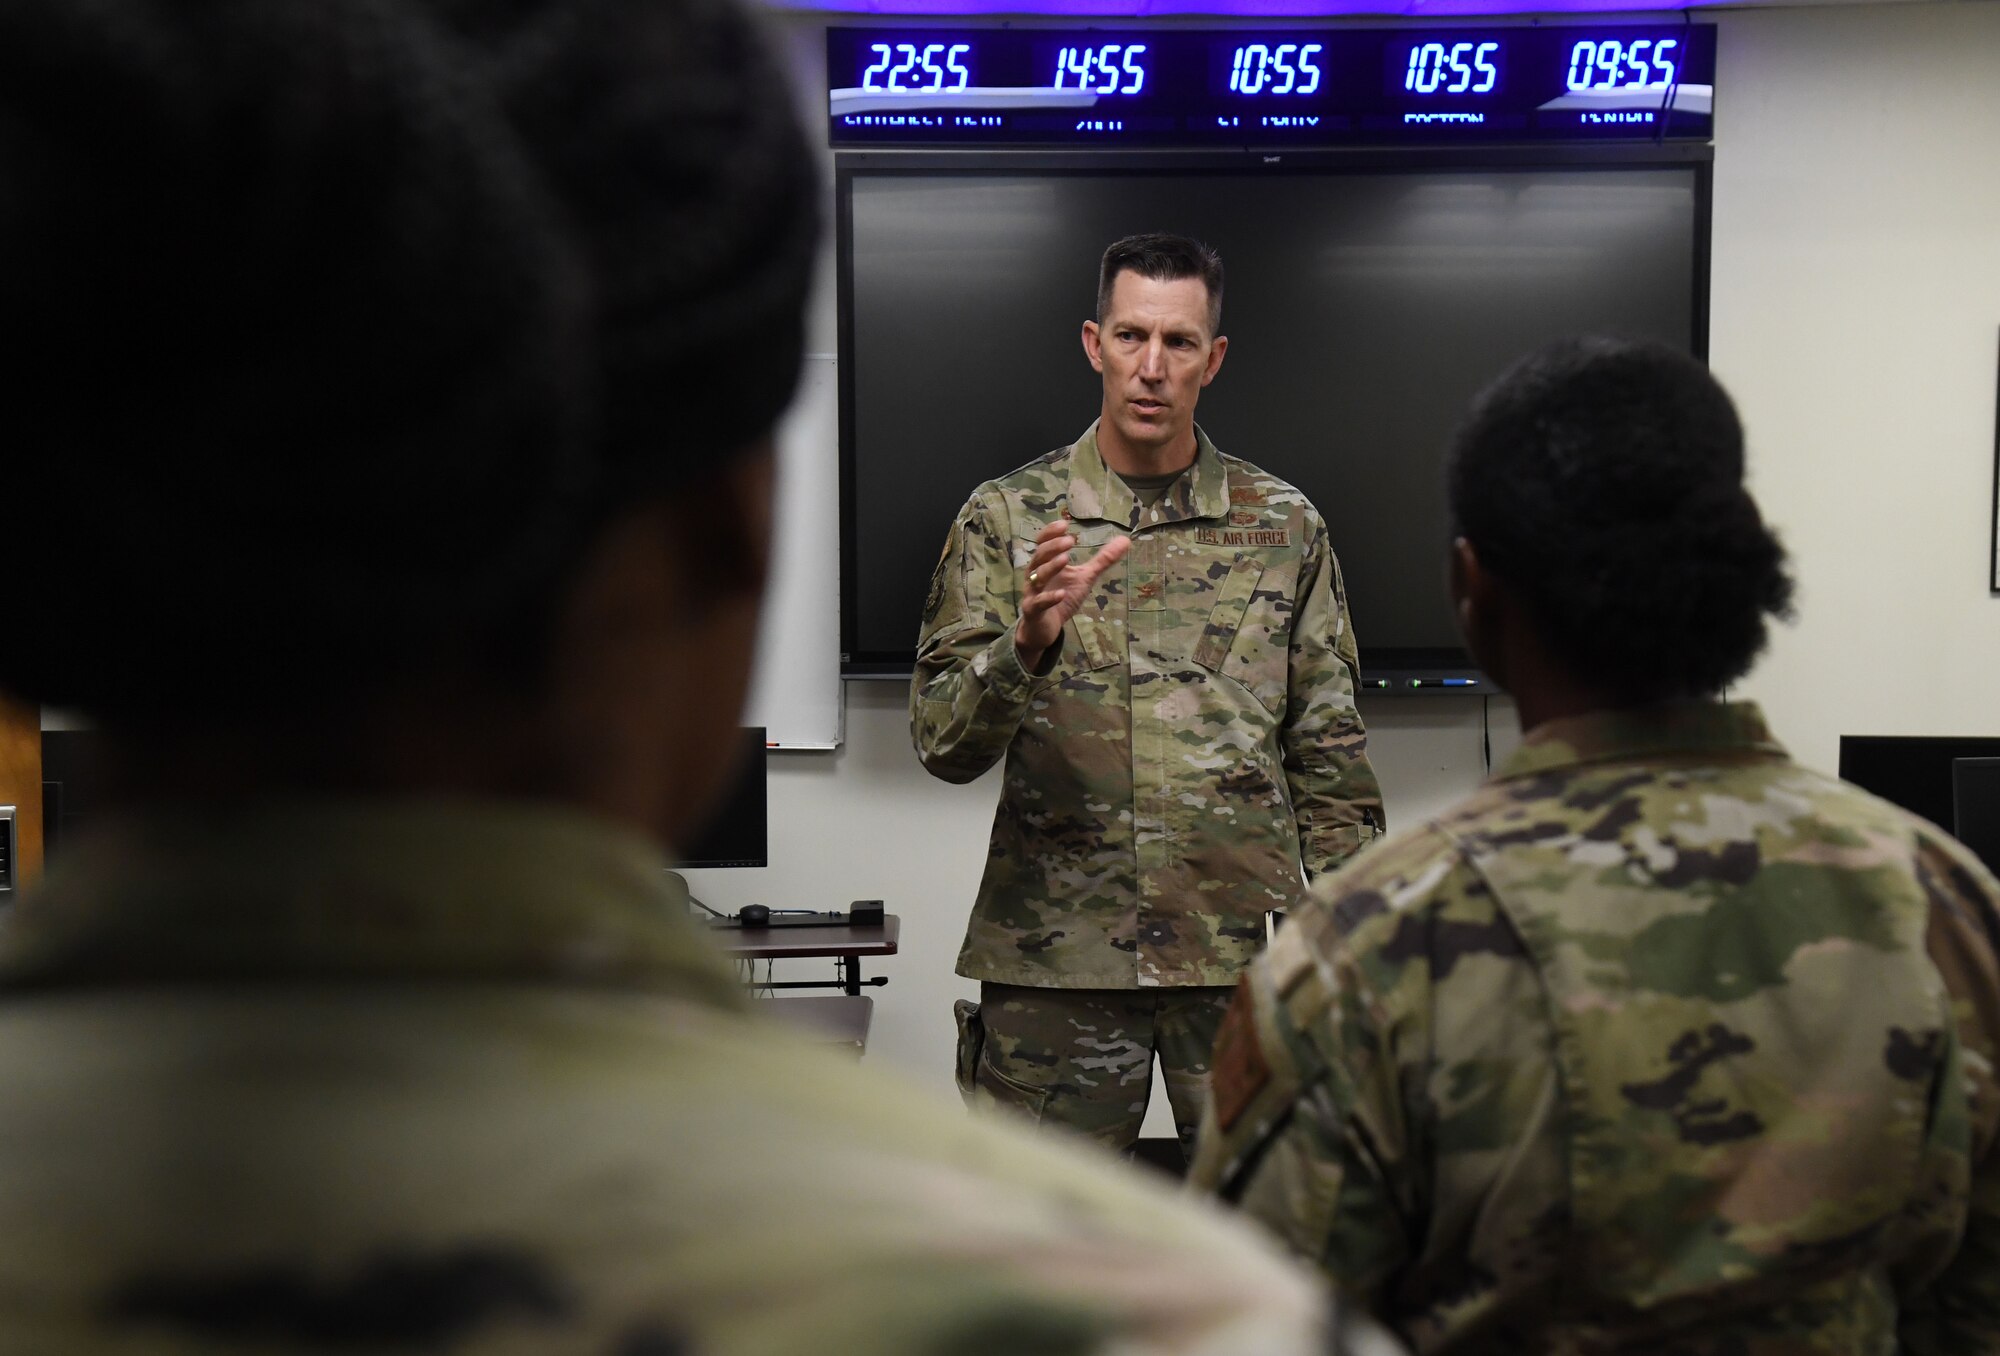 U.S. Air Force Col. Billy Pope, 81st Training Wing commander, visits the 81st Logistics Readiness Squadron logistics plans department during the 81st Mission Support Group Immersion Tour inside the Taylor Logistics Center at Keesler Air Force Base, Mississippi, April 7, 2023.